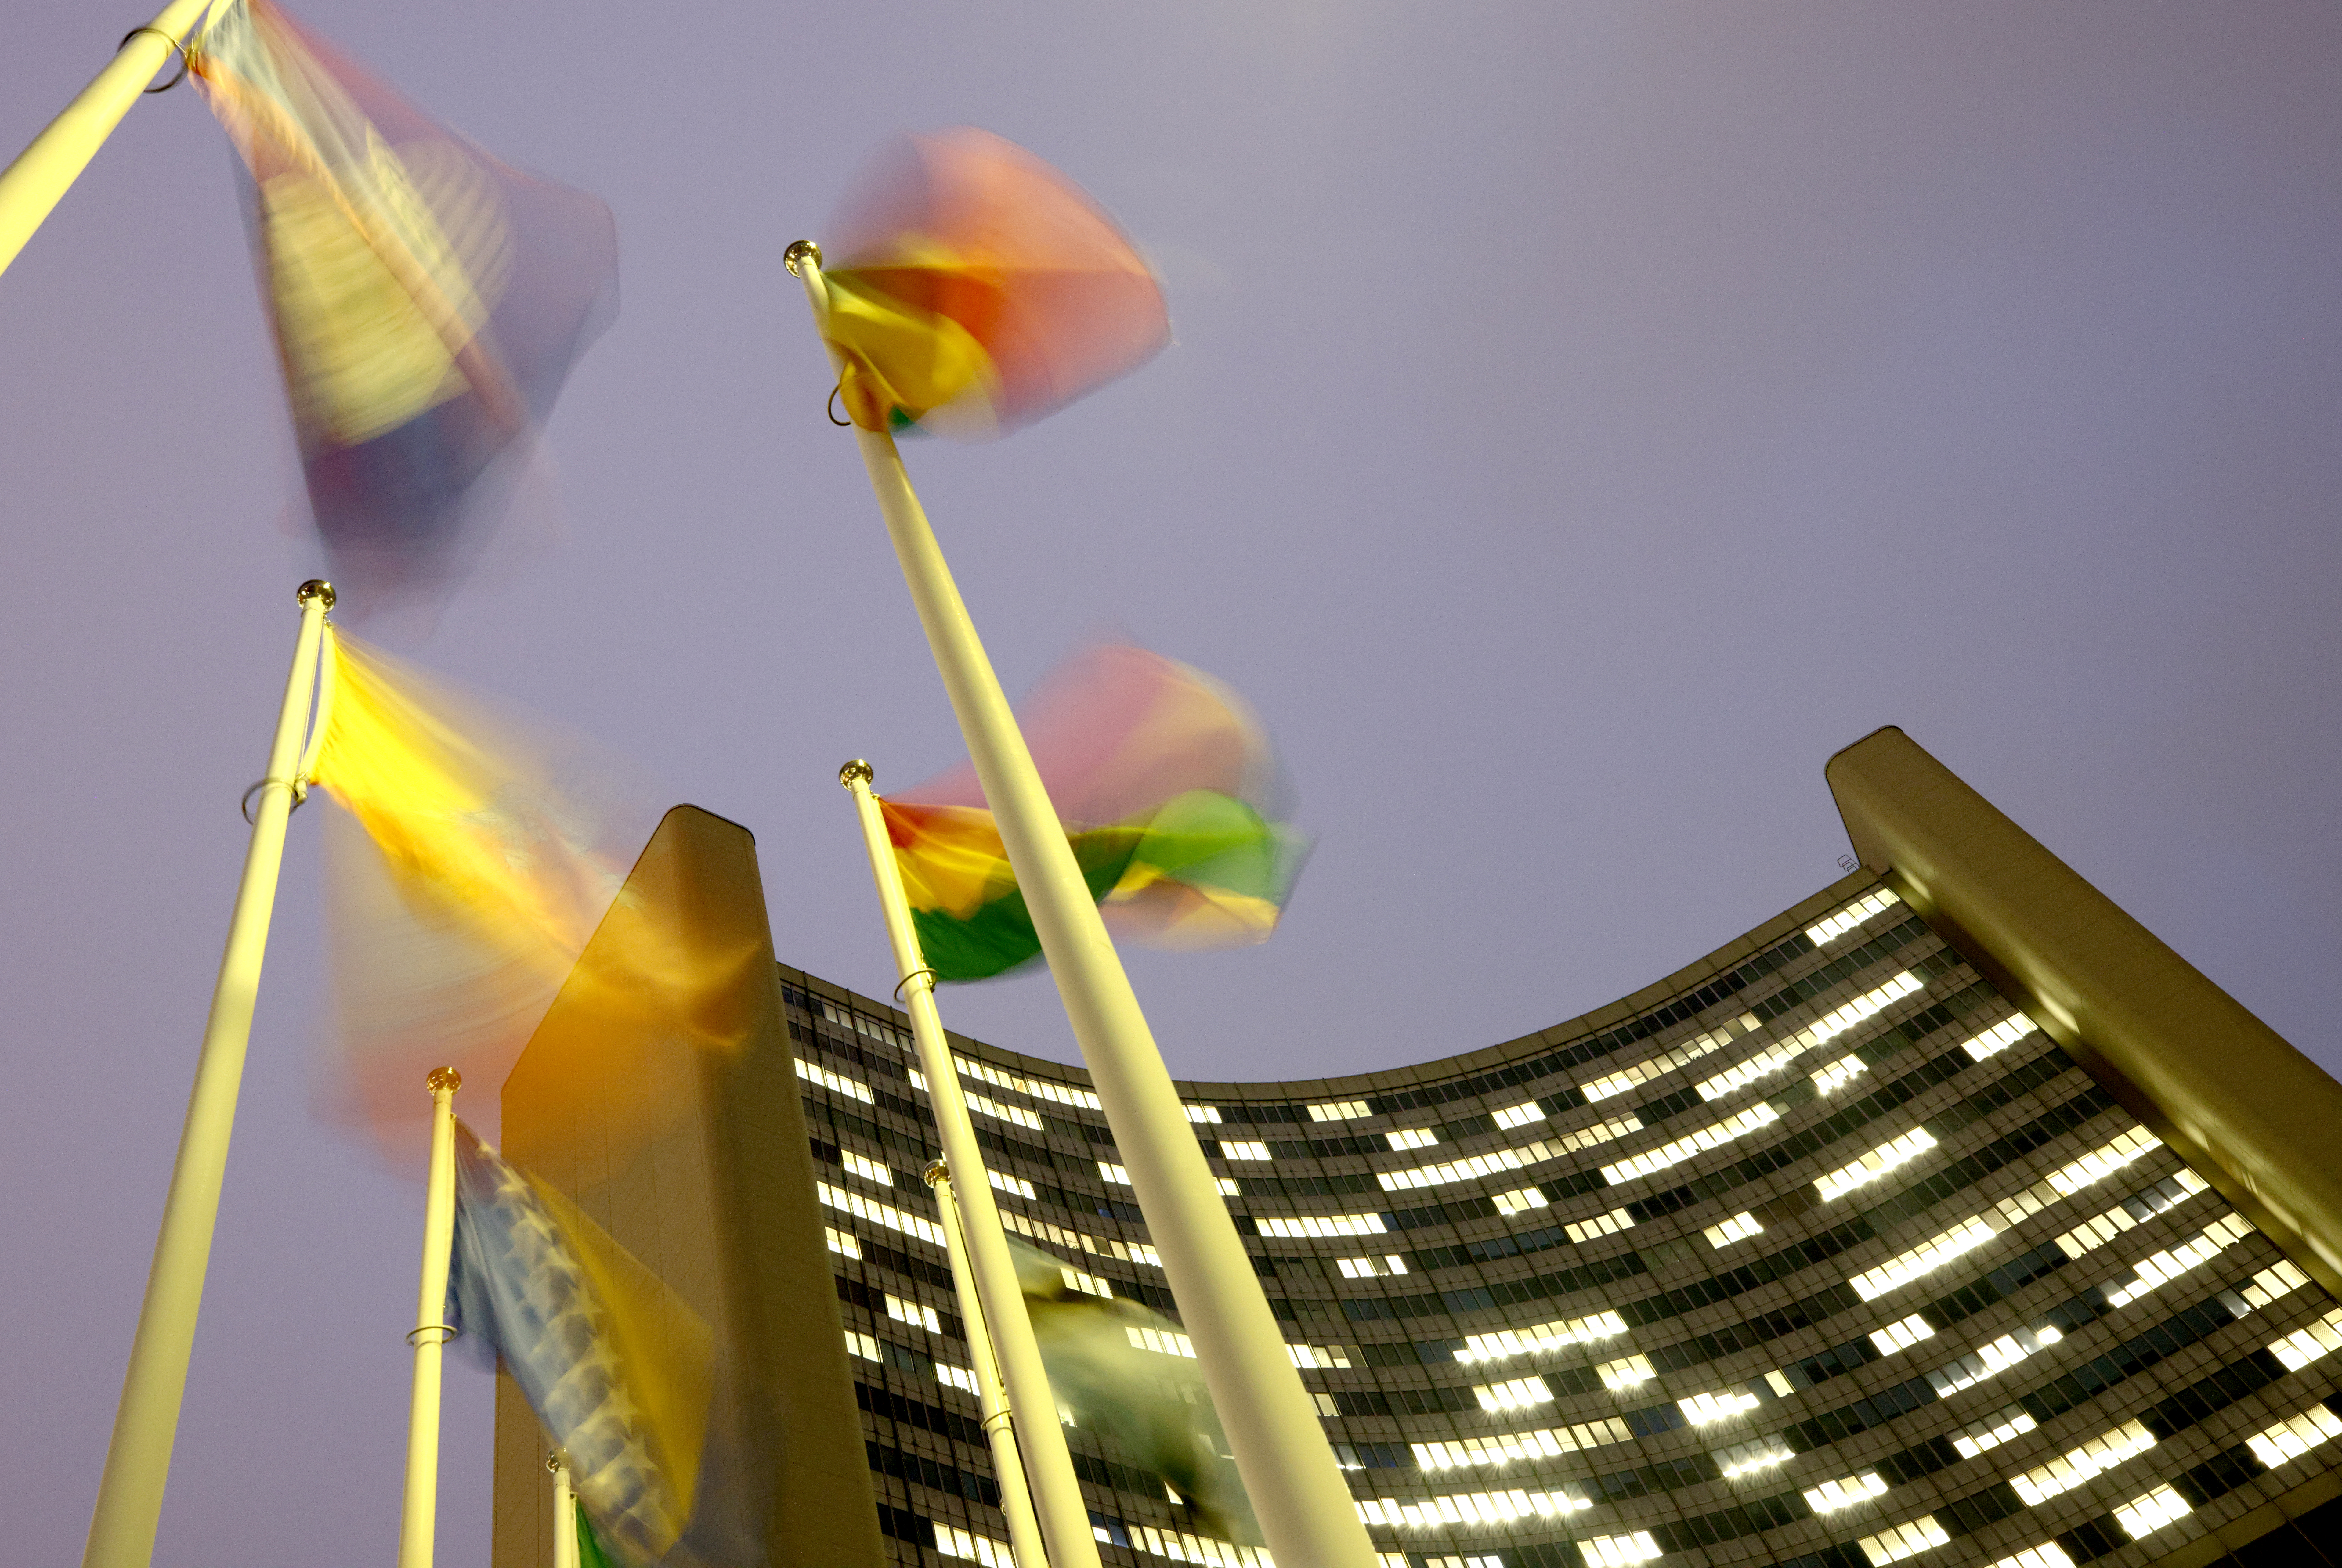 Flags flutter in the wind in front of the headquarters of the International Atomic Energy Agency (IAEA) in Vienna